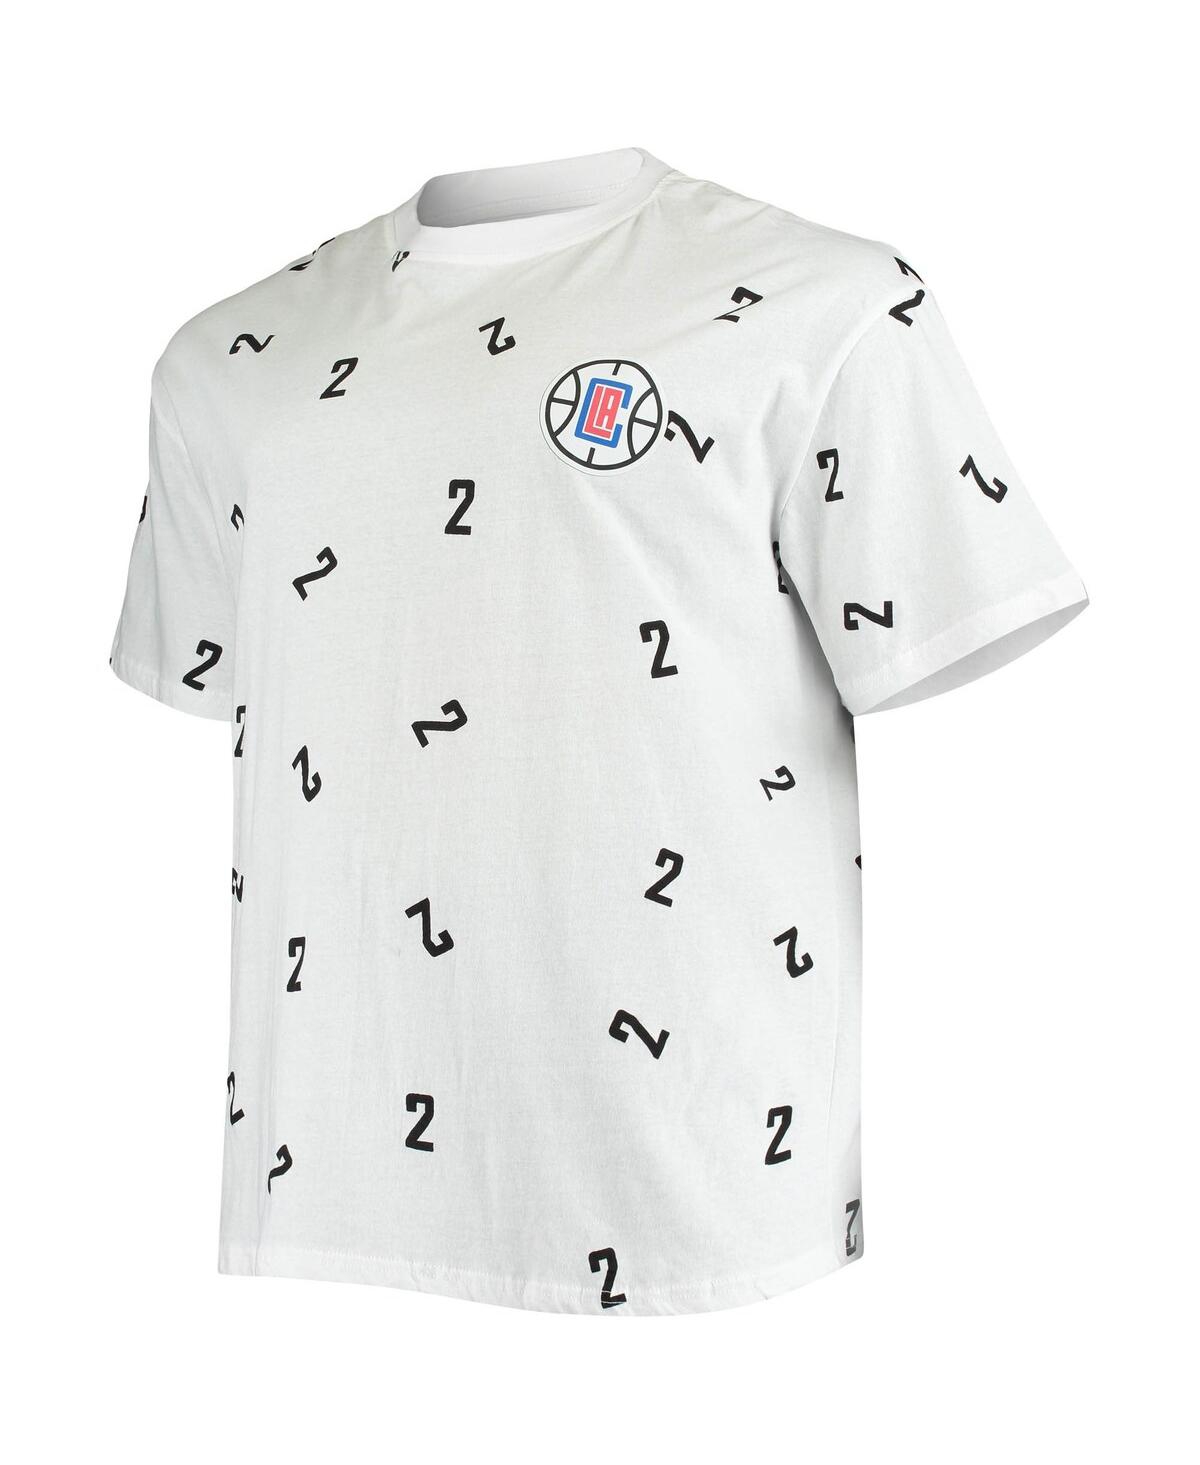 Shop Fanatics Men's  Kawhi Leonard White La Clippers Big And Tall Allover Name And Number T-shirt